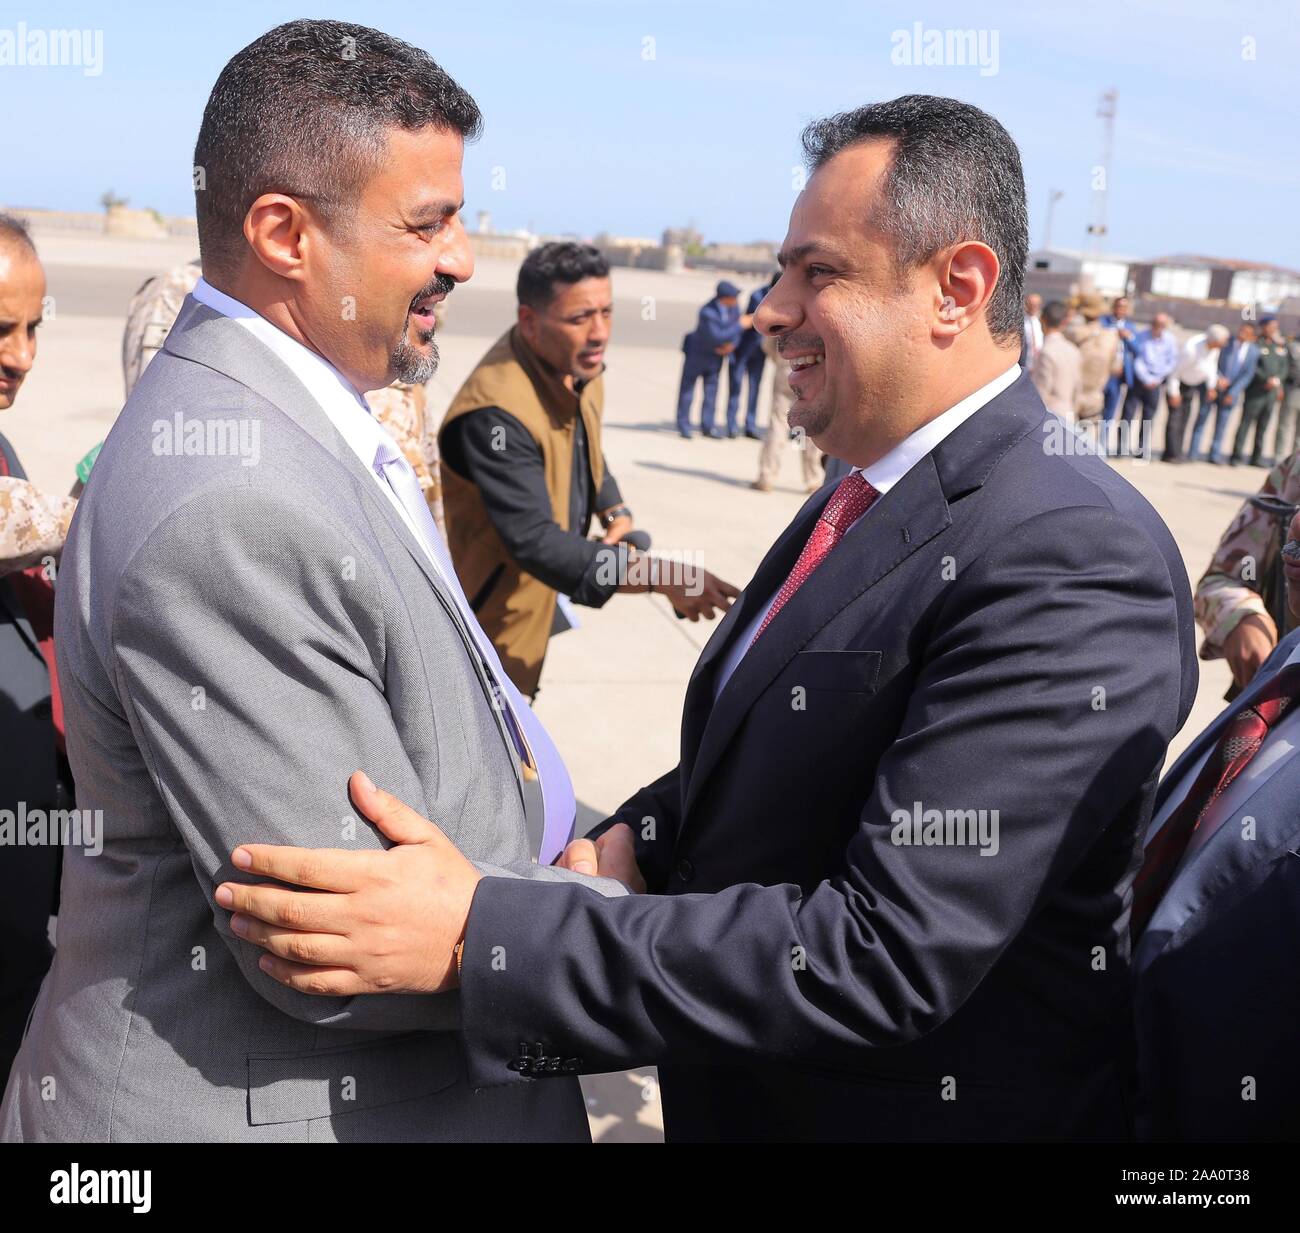 Aden. 18th Nov, 2019. Yemen's Prime Minister Maeen Abdulmalik (R) shakes hands with a local government official at Aden's International Airport, Yemen, on Nov. 18, 2019. Yemen's Prime Minister Maeen Abdulmalik and other ministers and government officials arrived on Monday in the country's southern port city of Aden. Credit: Xinhua/Alamy Live News Stock Photo